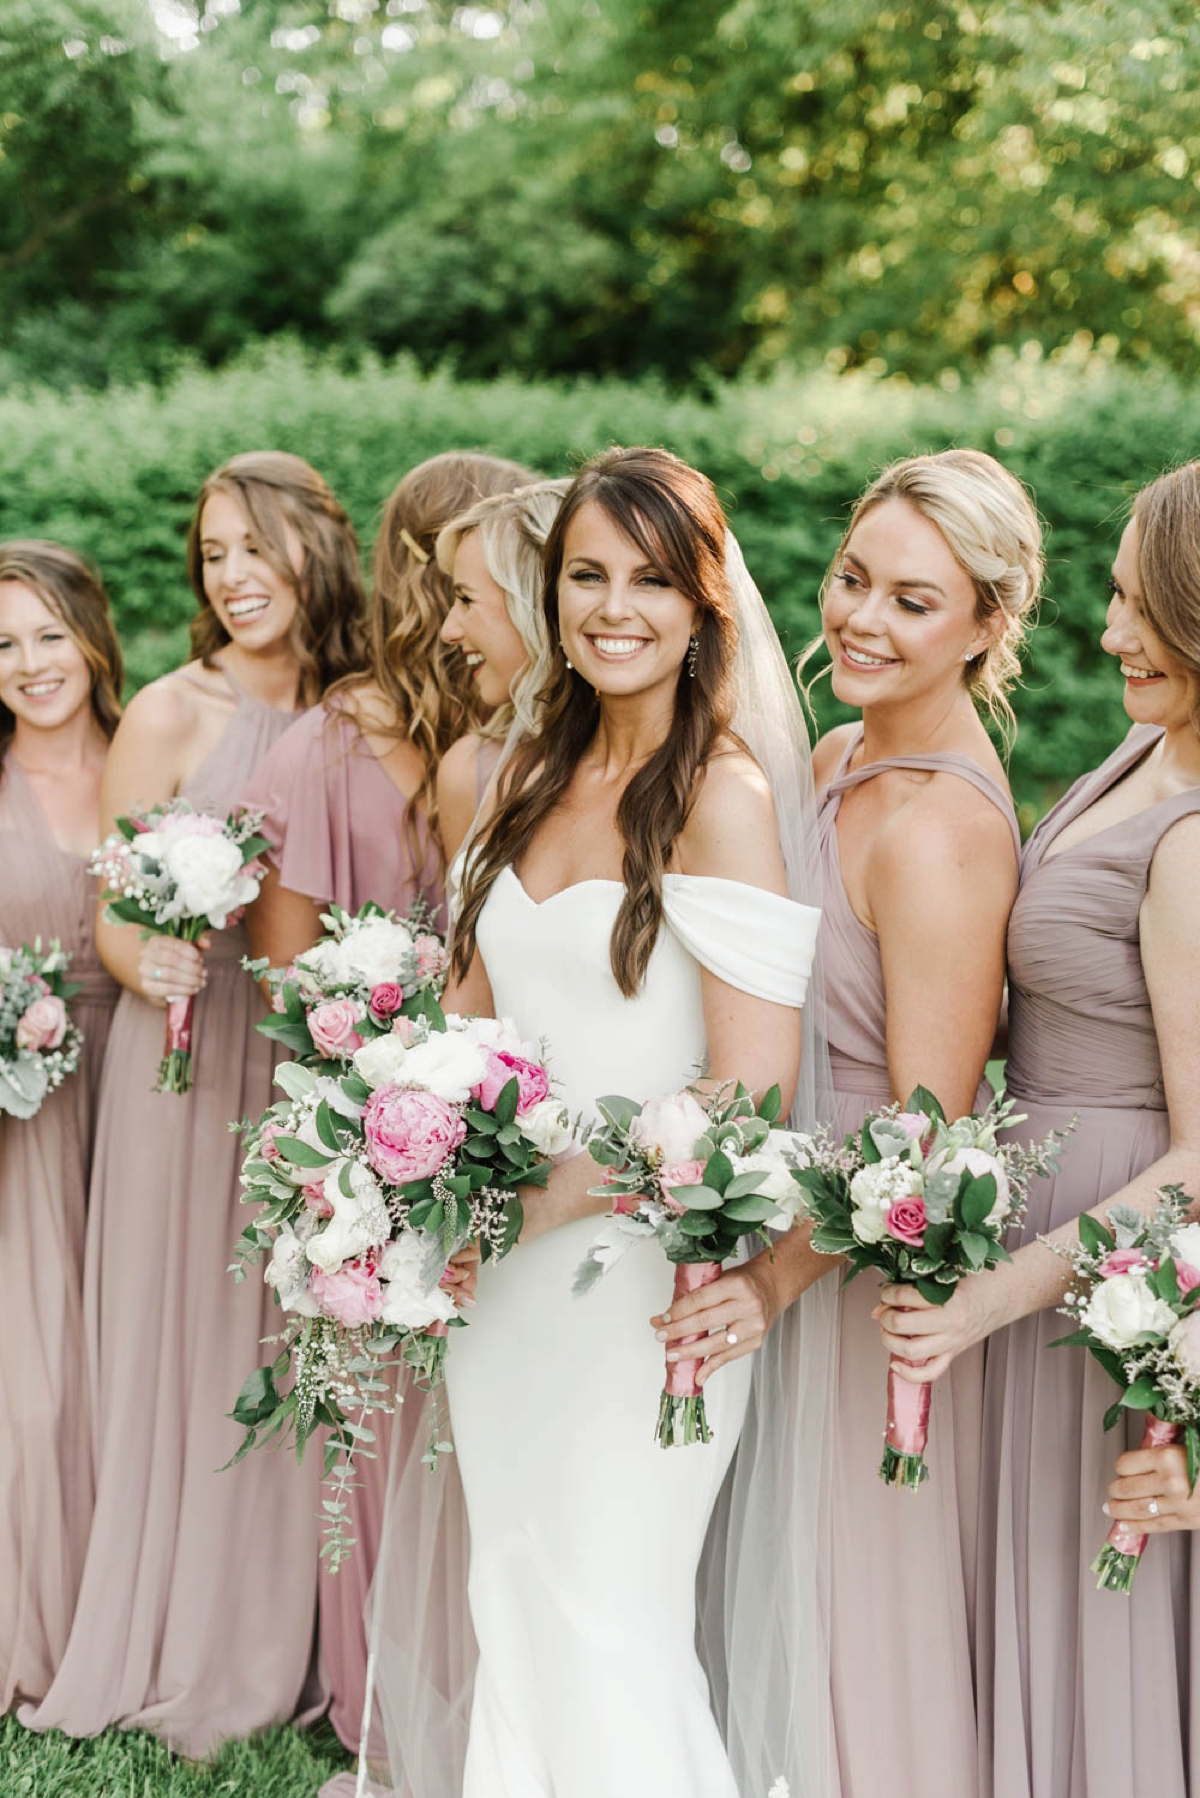 Garden Inspired Summer Wedding at Glen Magna Farms in Danvers, Massachusetts by Boston Wedding Photographer Annmarie Swift - Bridesmaids dressed in dusty rose dresses with bouquets